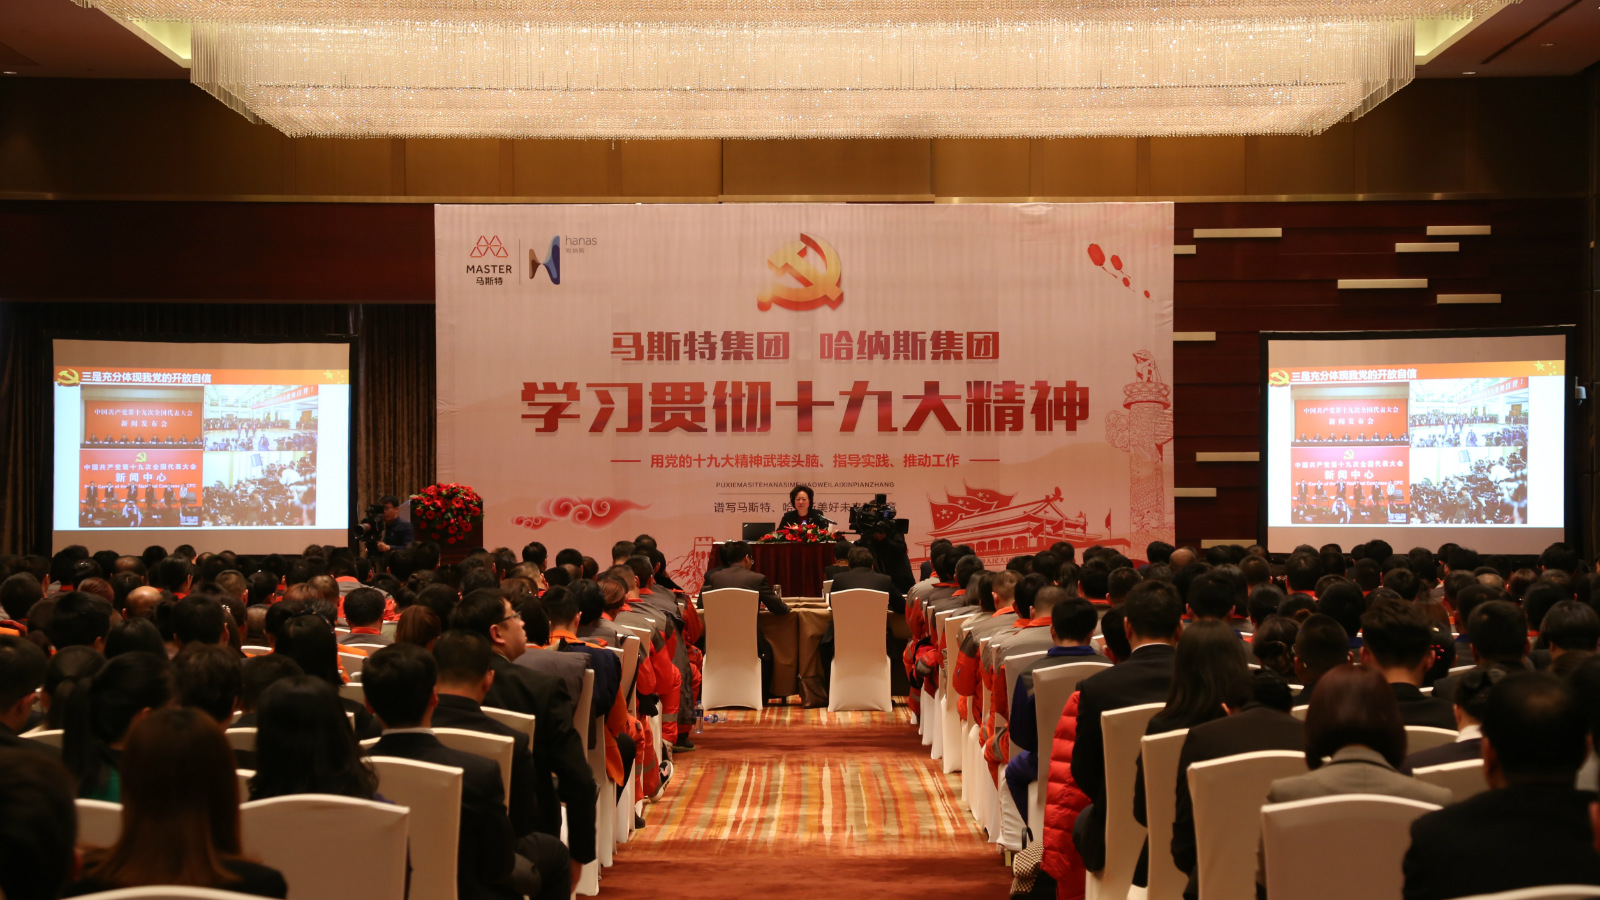 Master Group and Hanas Group Hold a Seminar on 19th CPC National Congress